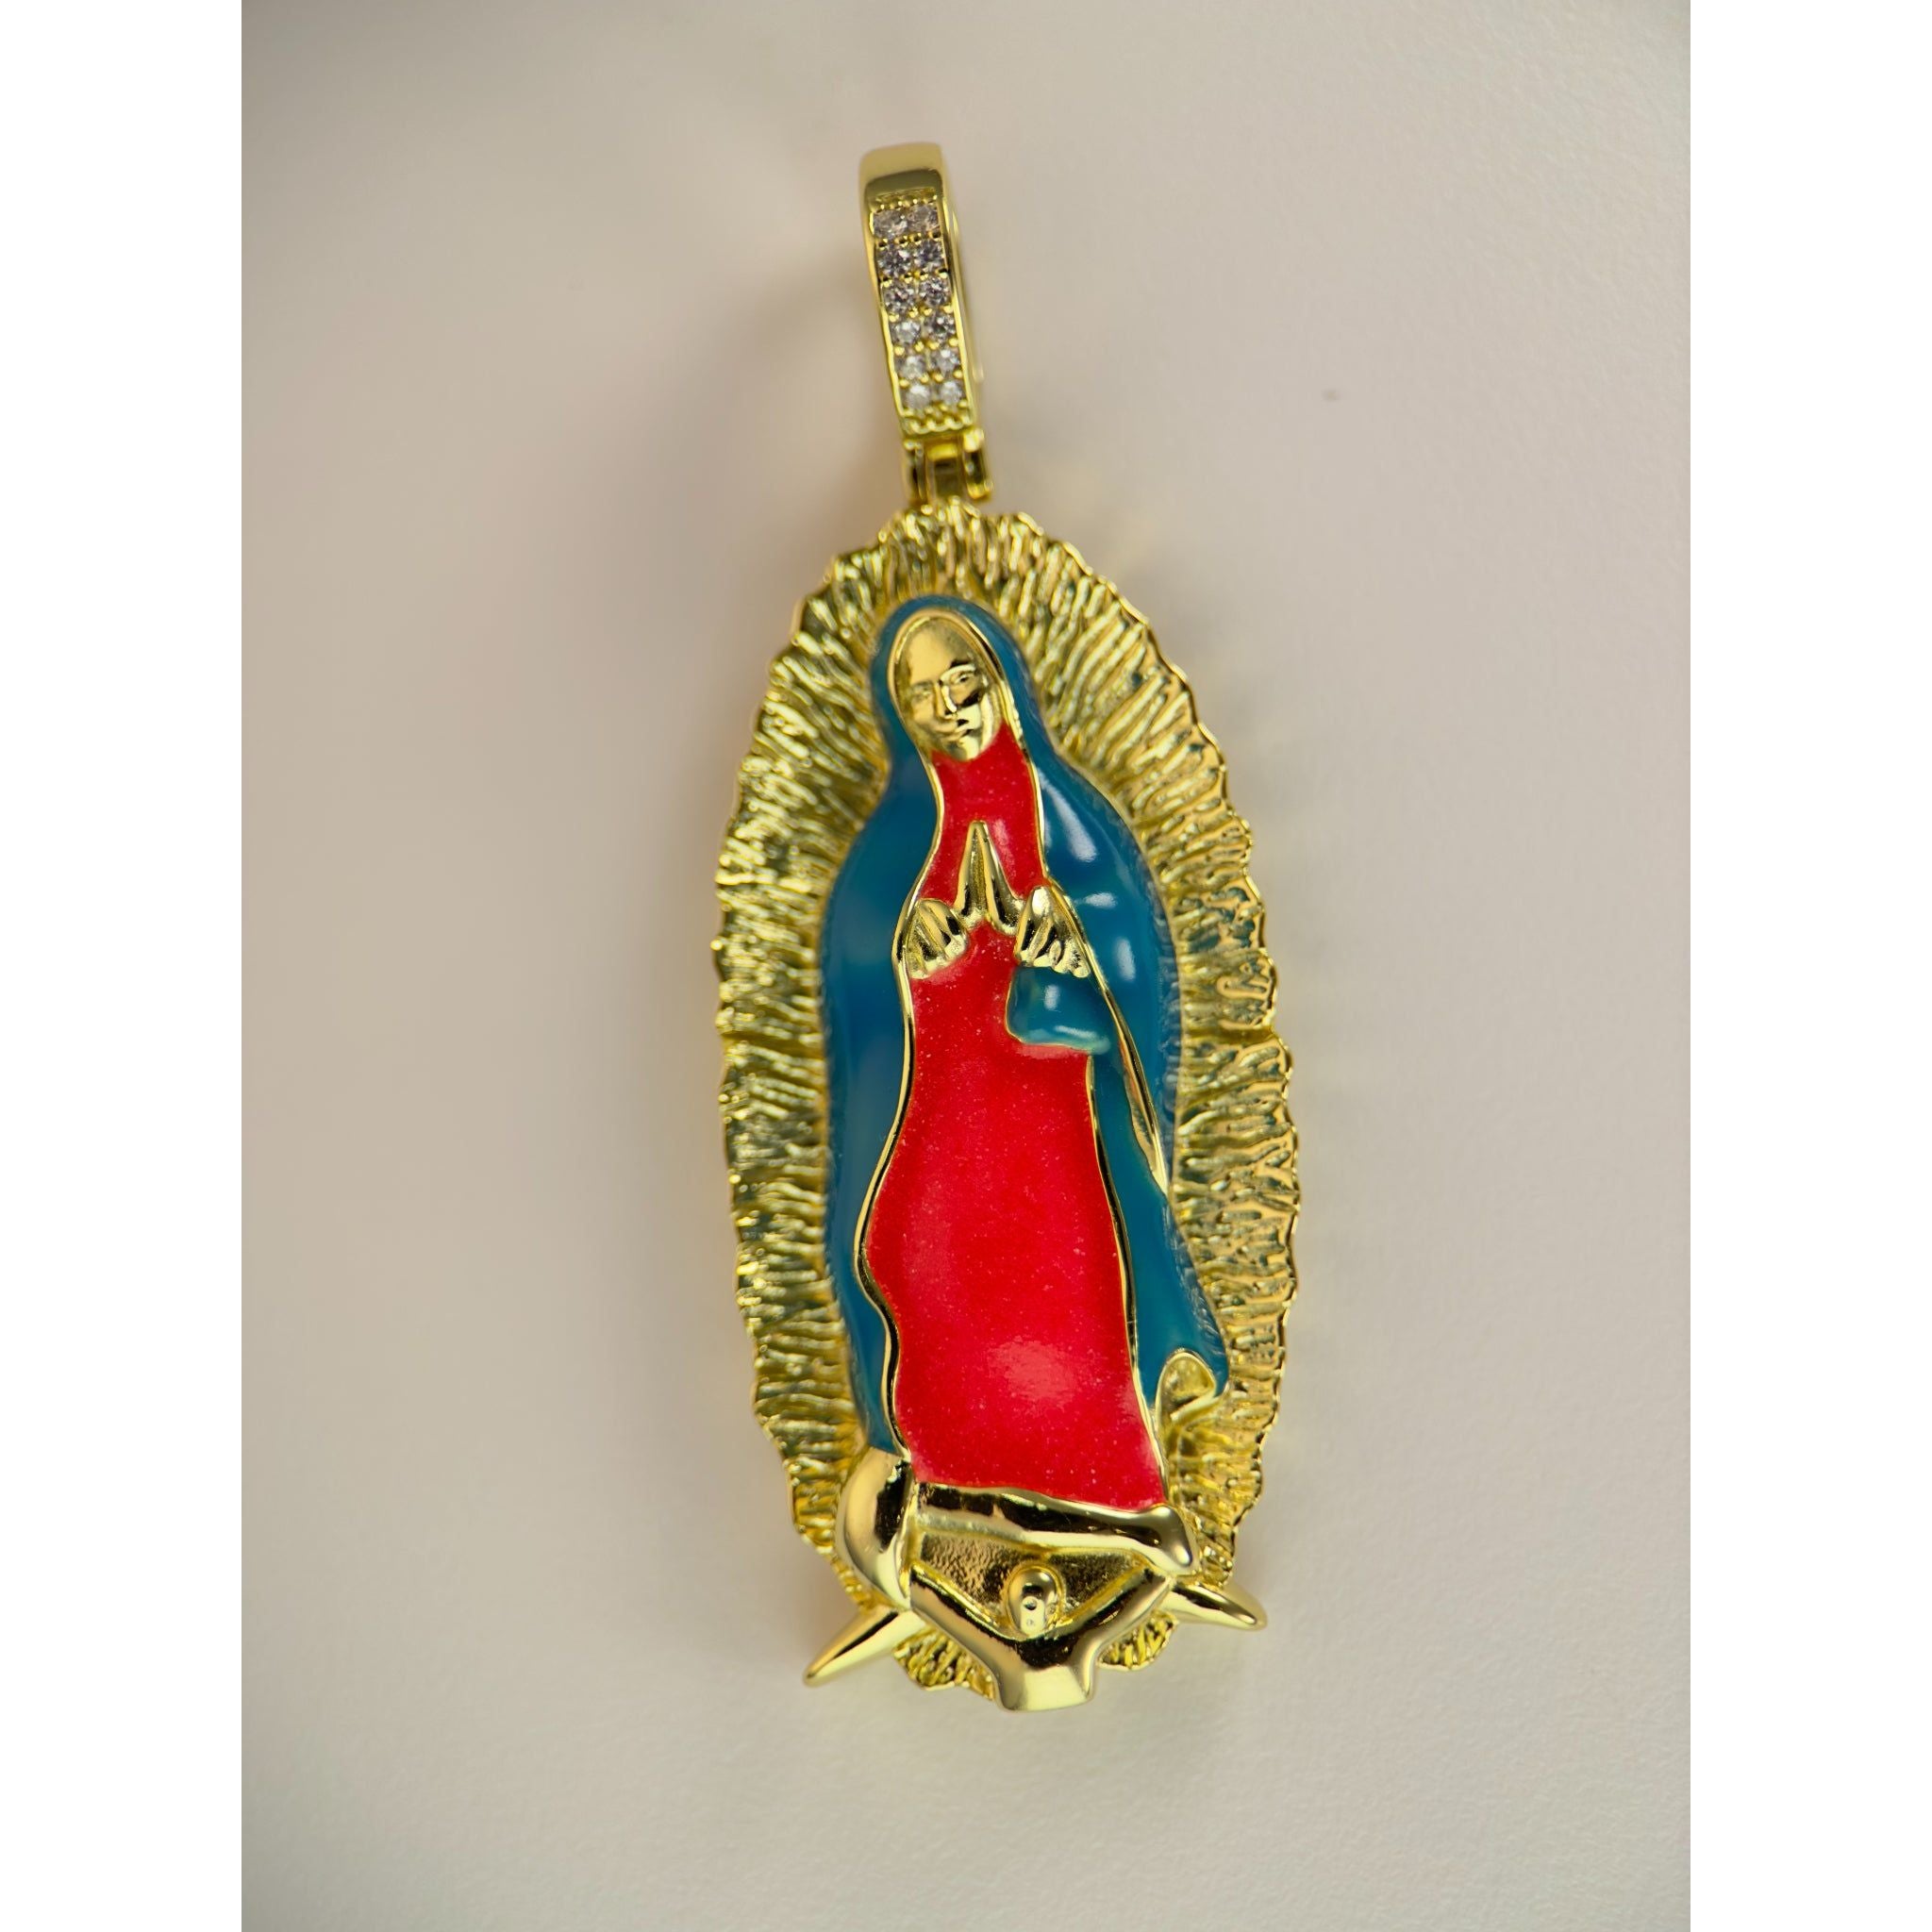 DR3165 - 925 Sterling Silver,14k Gold Bonded - Lab Created Stones - Pendant - Guadalupe Virgin Mary (Enamel)